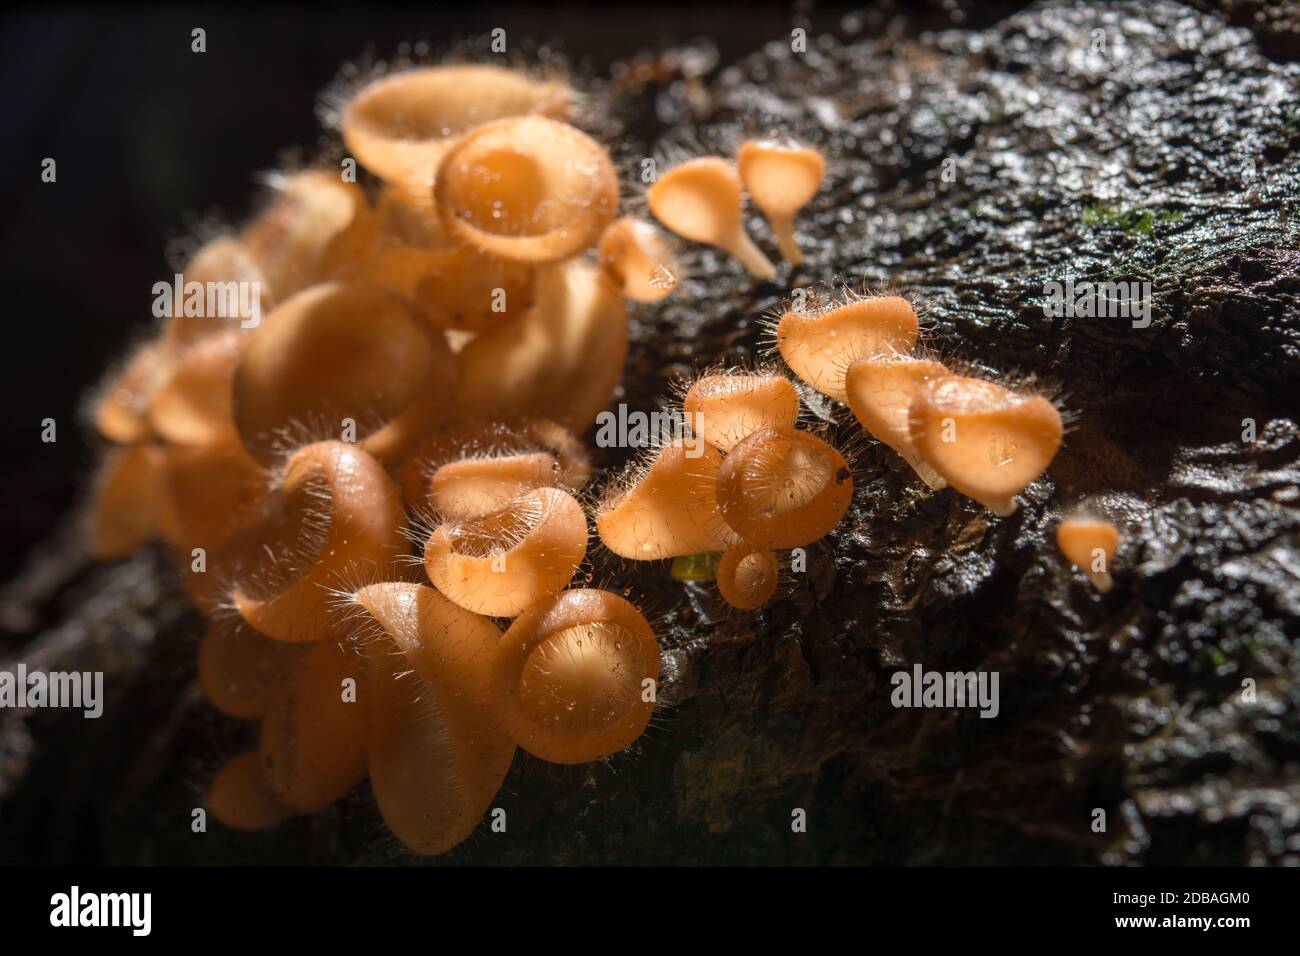 Mushroom in the rain forest among the fallen leaves and bark Stock Photo